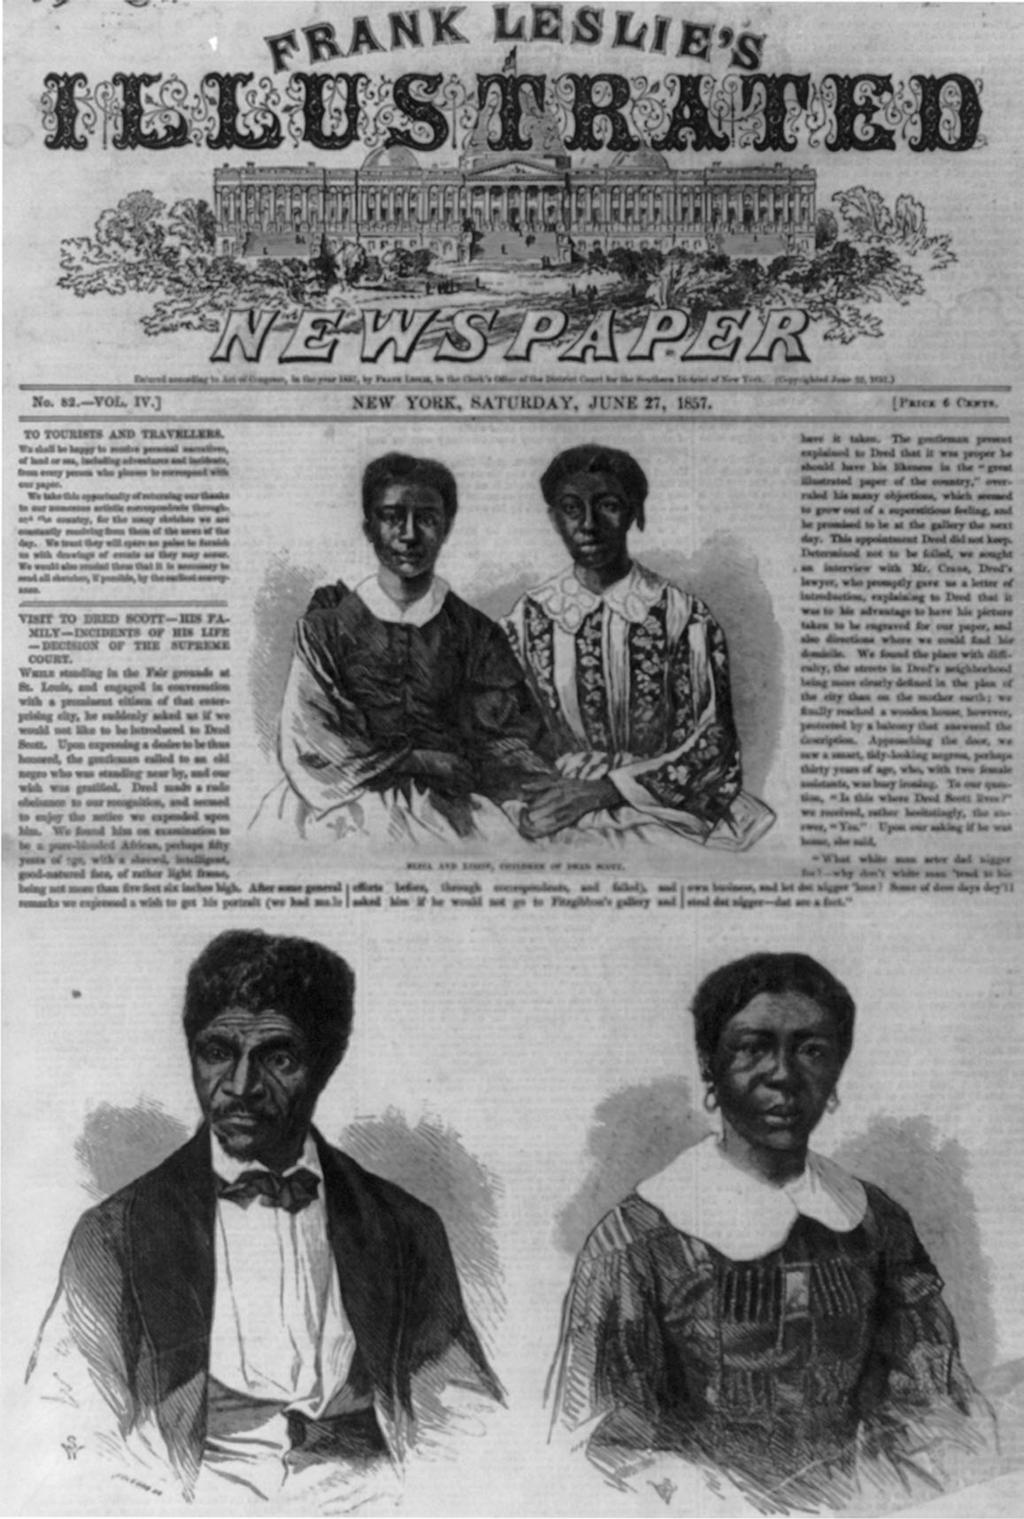 Figure 1. In June 1857, in the wake of the U.S. Supreme Court proslavery ruling in Dred Scott v. Sanford, Leslie s Illustrated Weekly sought out Dred Scott in St.